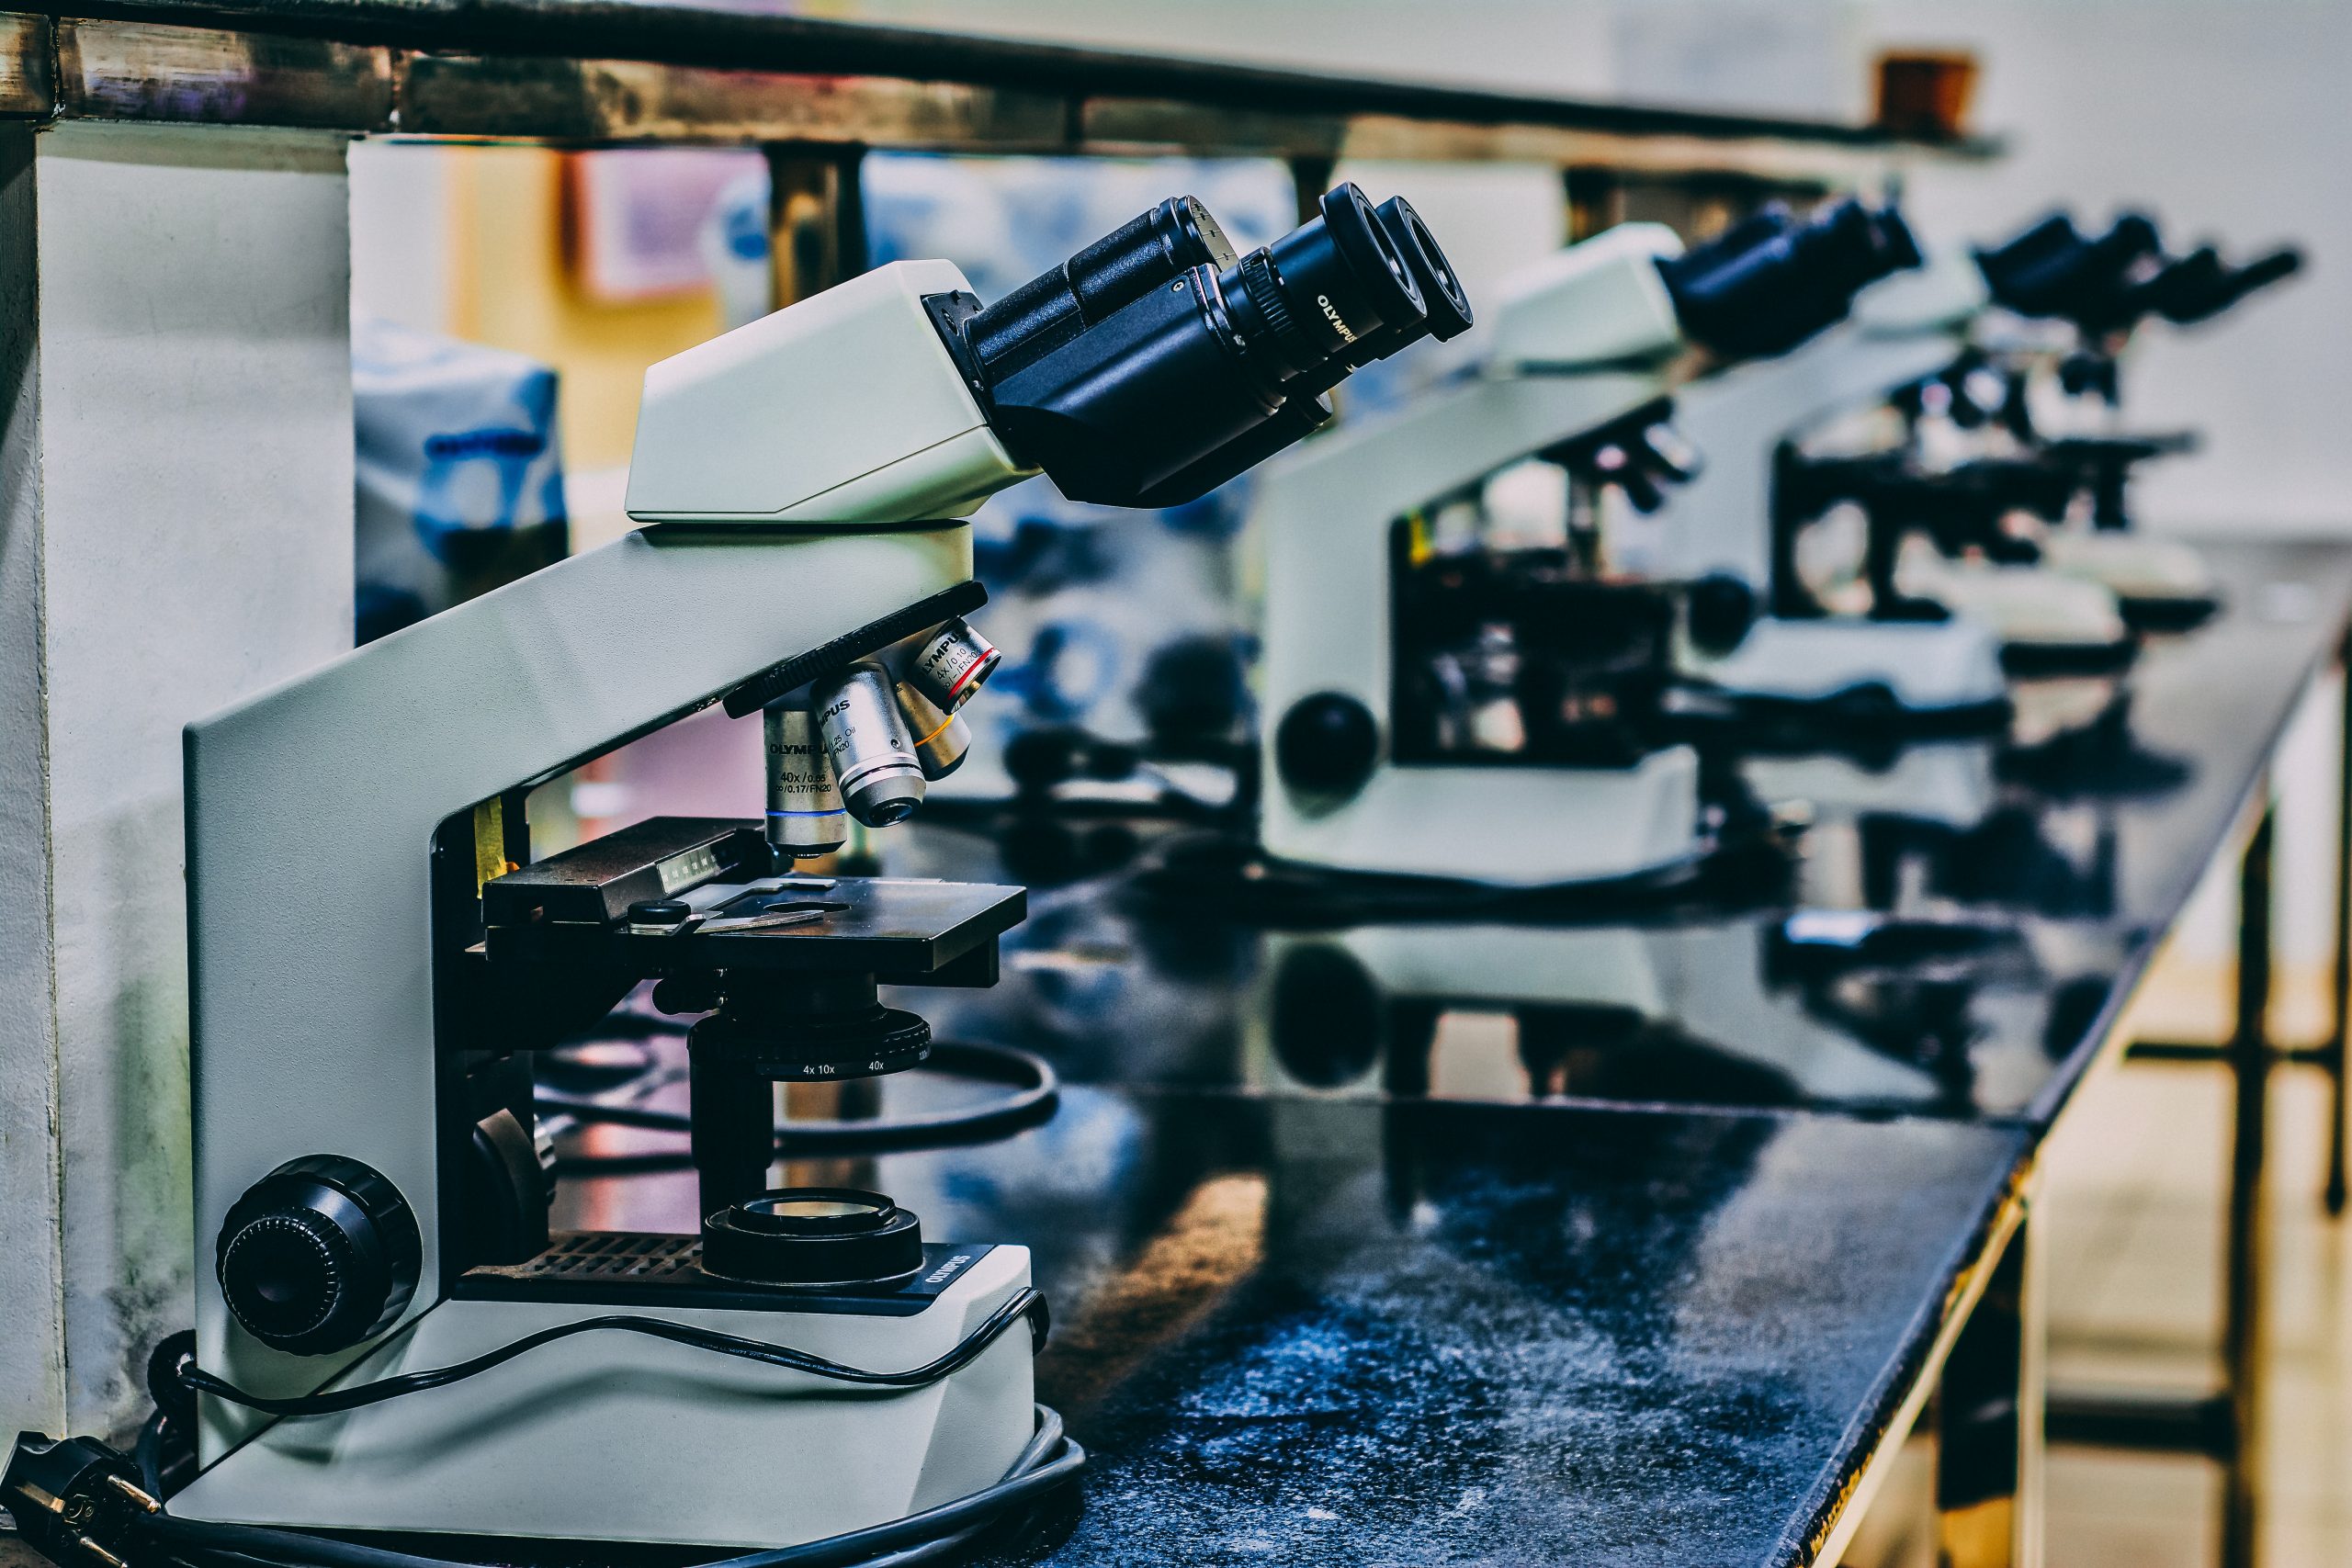 An array of microscopes on a lab bench